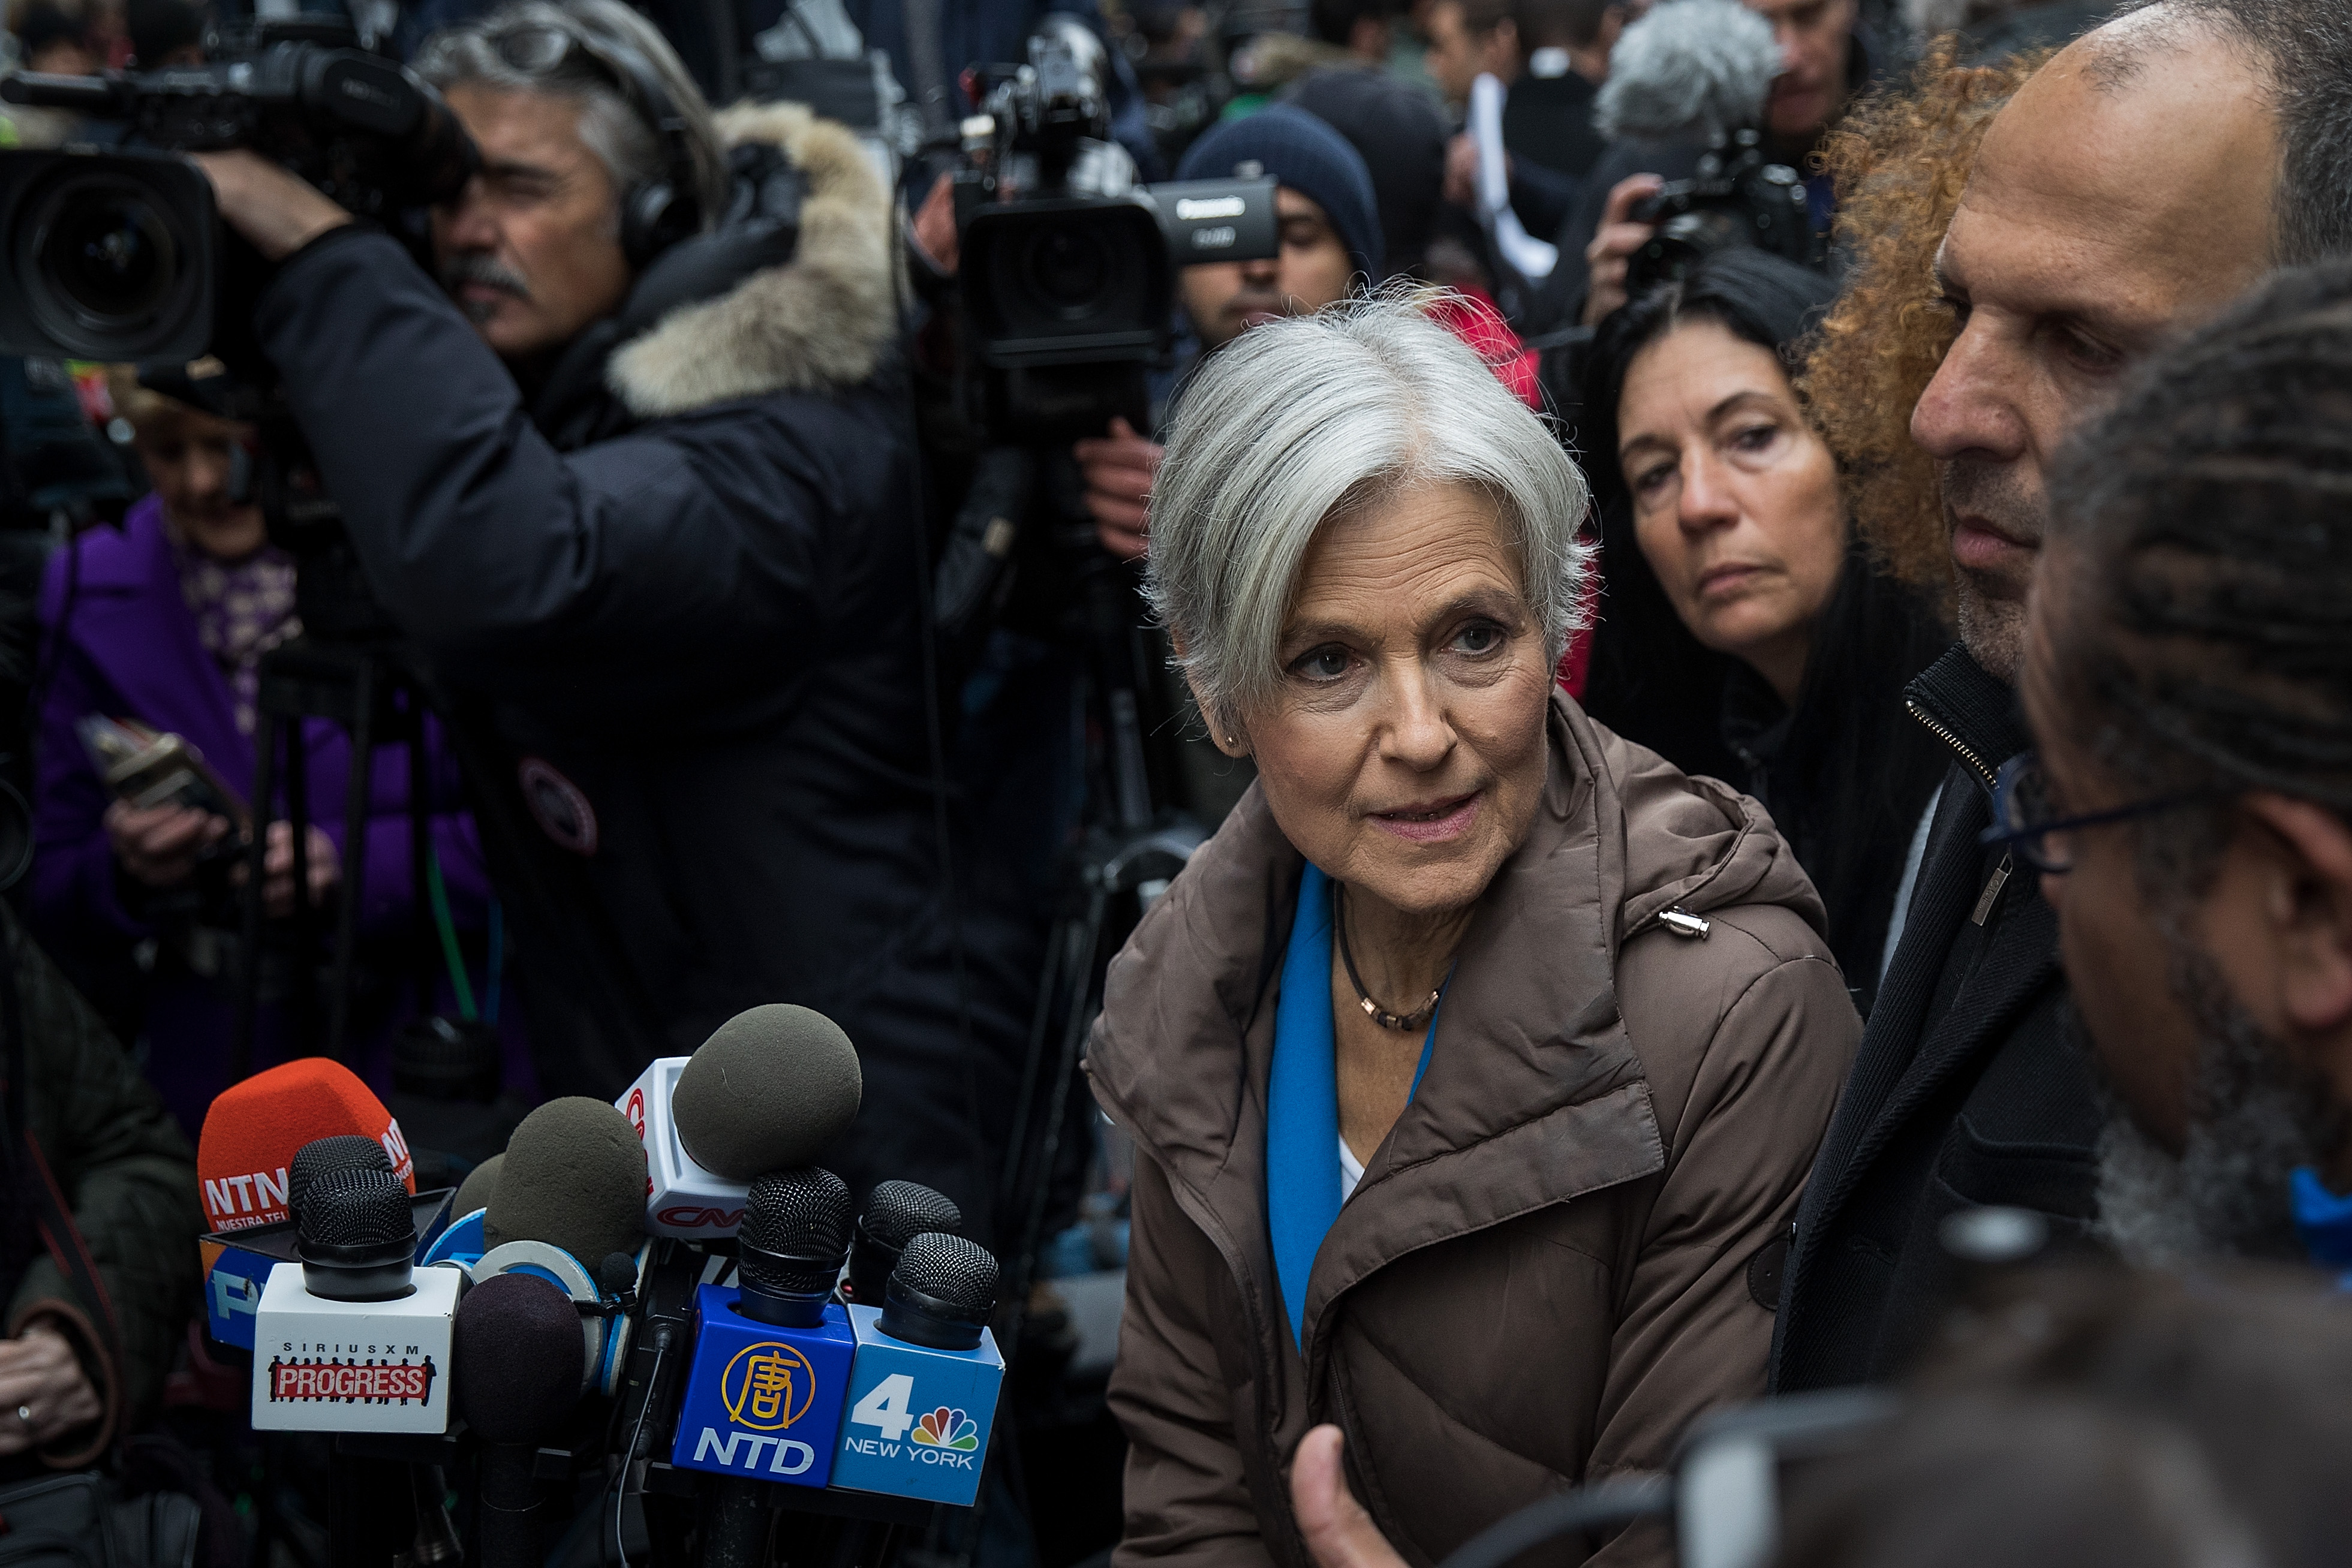 Green Party presidential candidate Jill Stein speaks at a news conference on Fifth Avenue across the street from Trump Tower December 5, 2016 in New York City. (Drew Angerer/Getty Images)